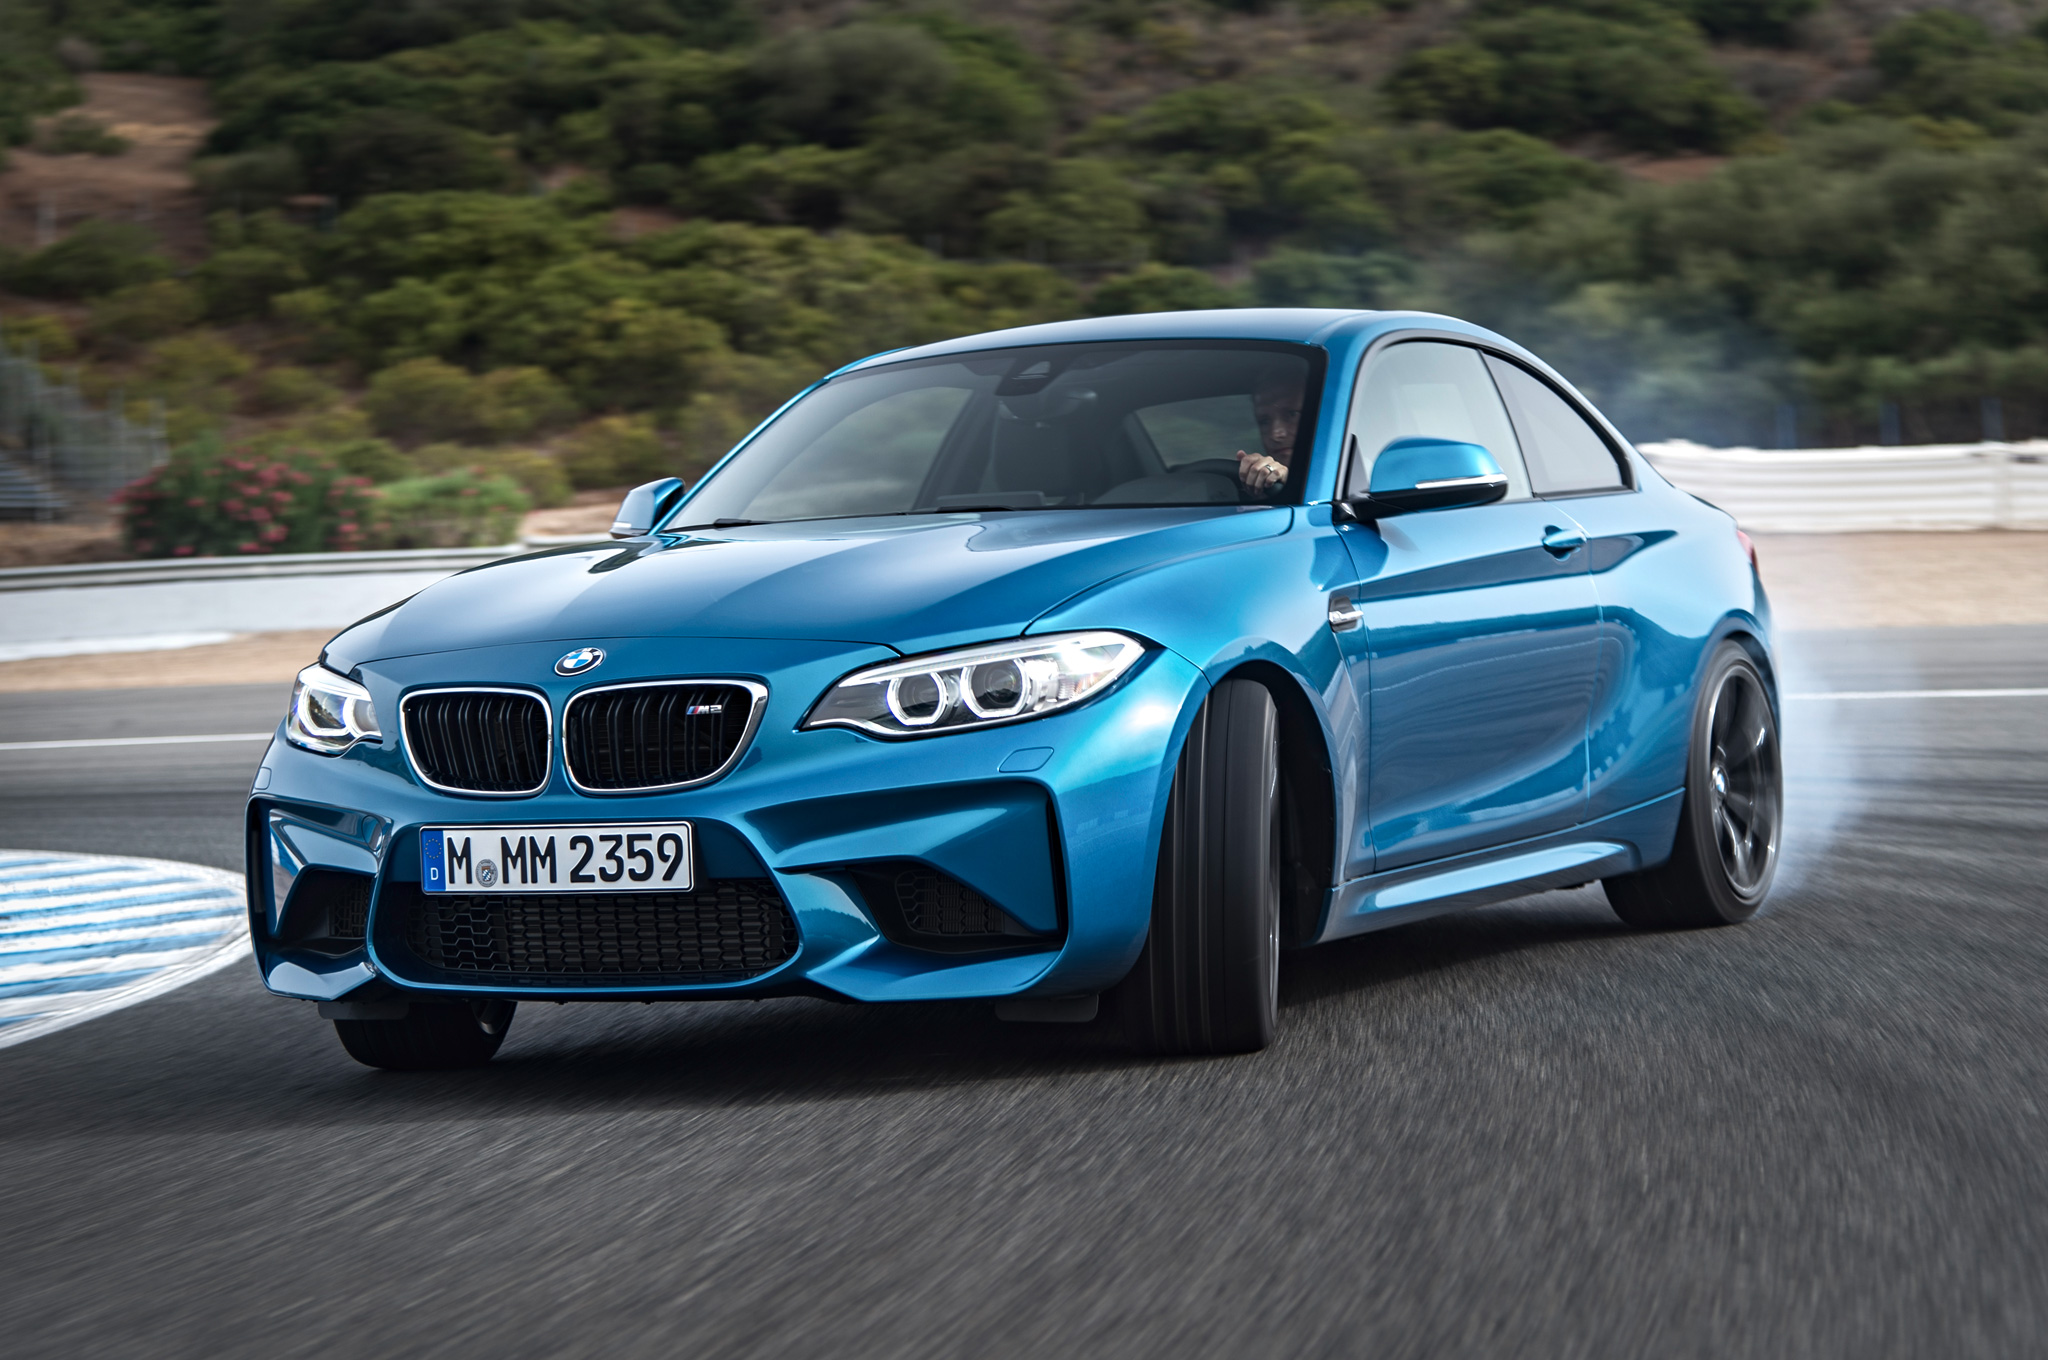 Automobile Magazine: BMW M2 Coupe Is All-Star`s Main Contender